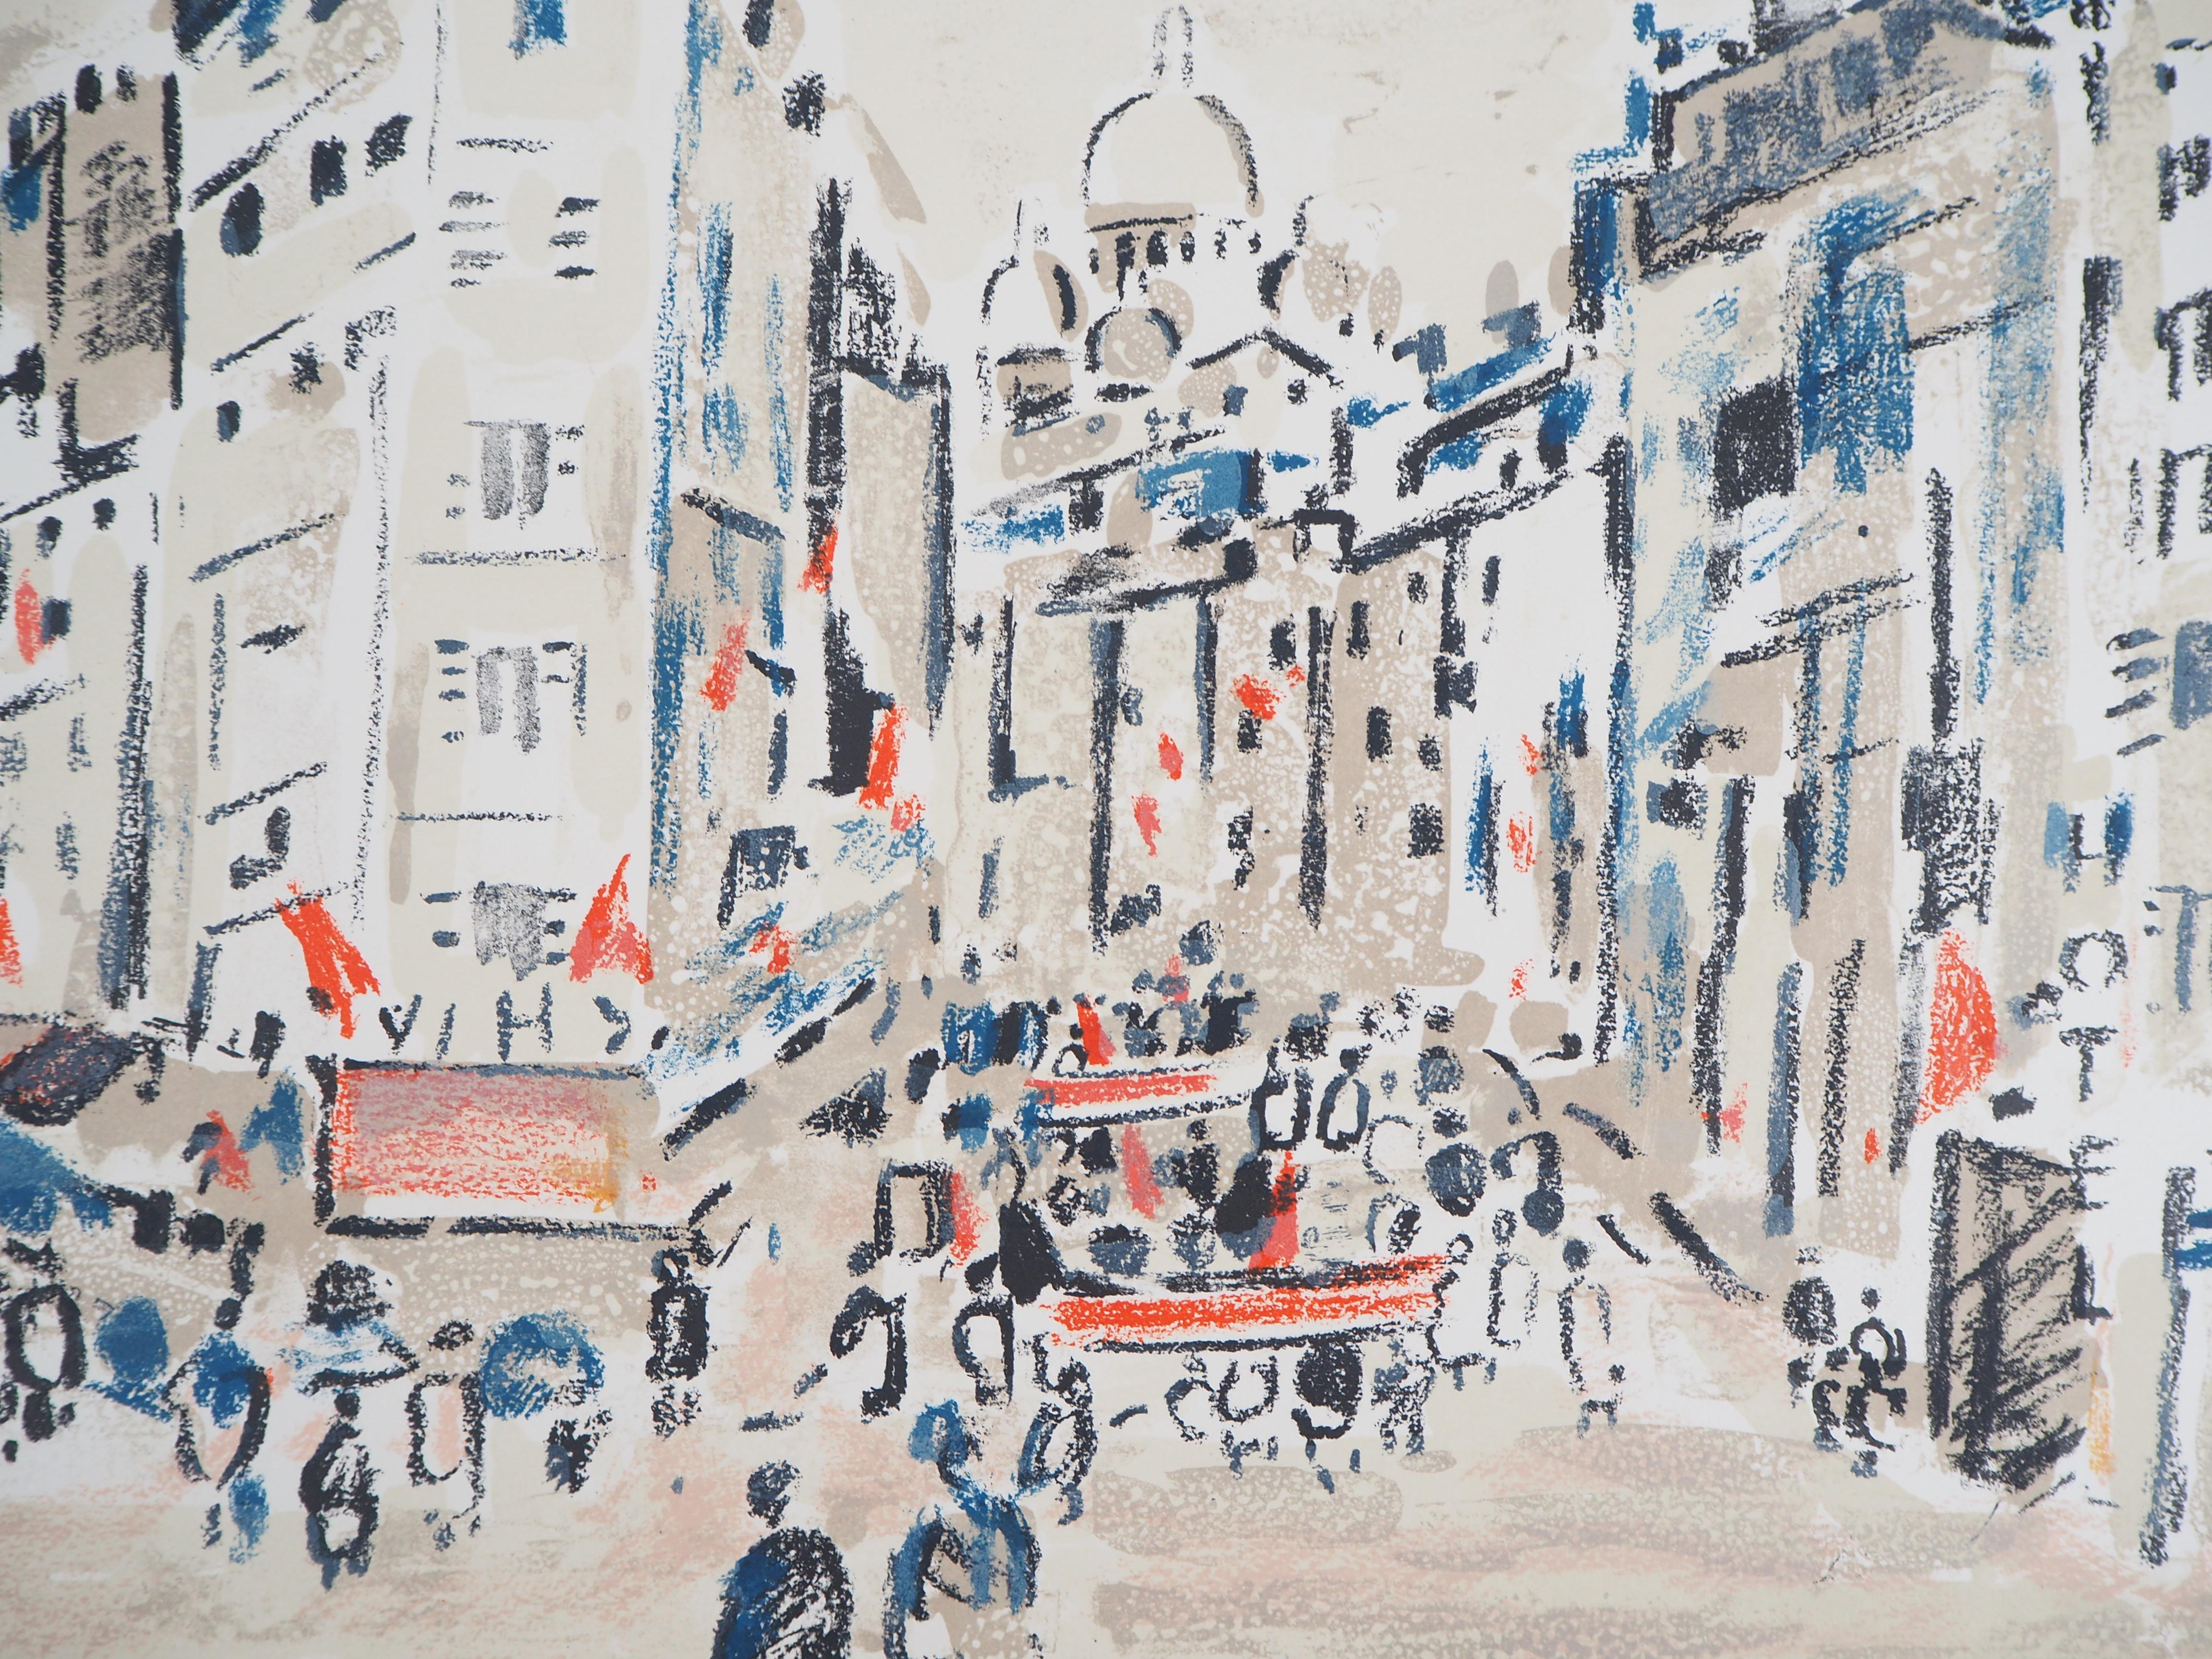 Paris : On the Way to Montmartre - Original Lithograph, Handsigned - Modern Print by Robert Savary